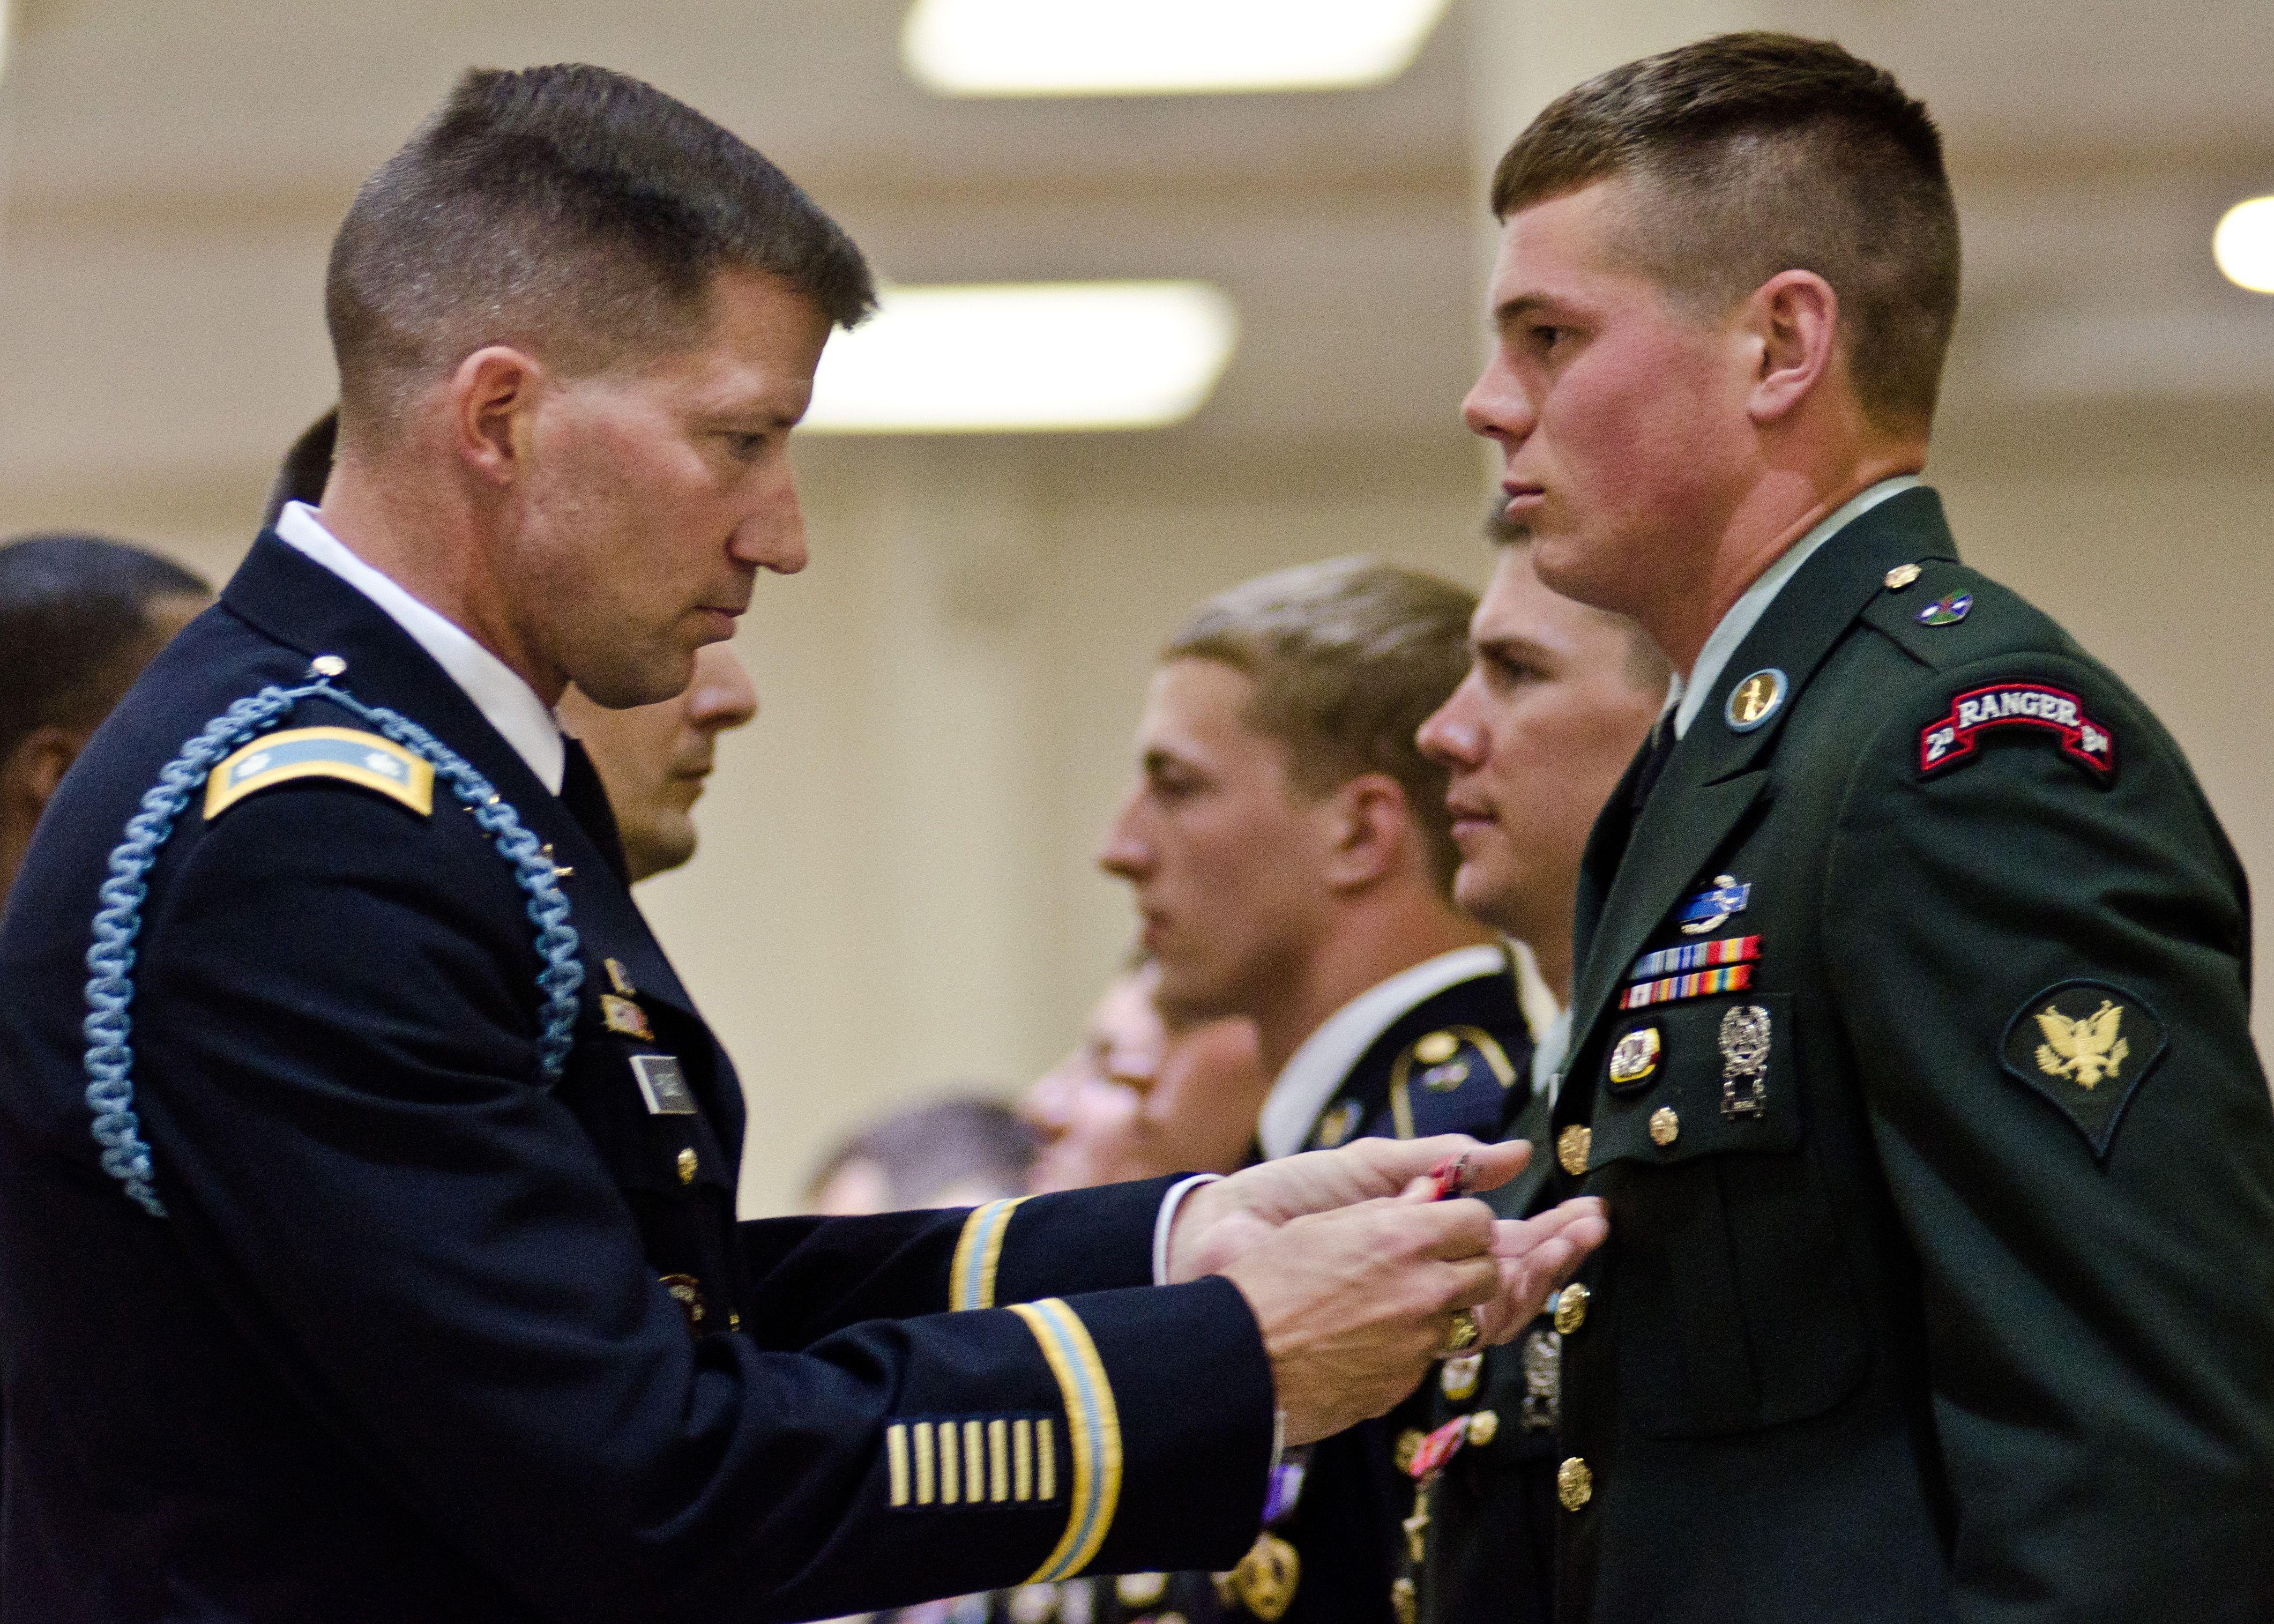 Army Rangers hold rare public ceremony to celebrate service